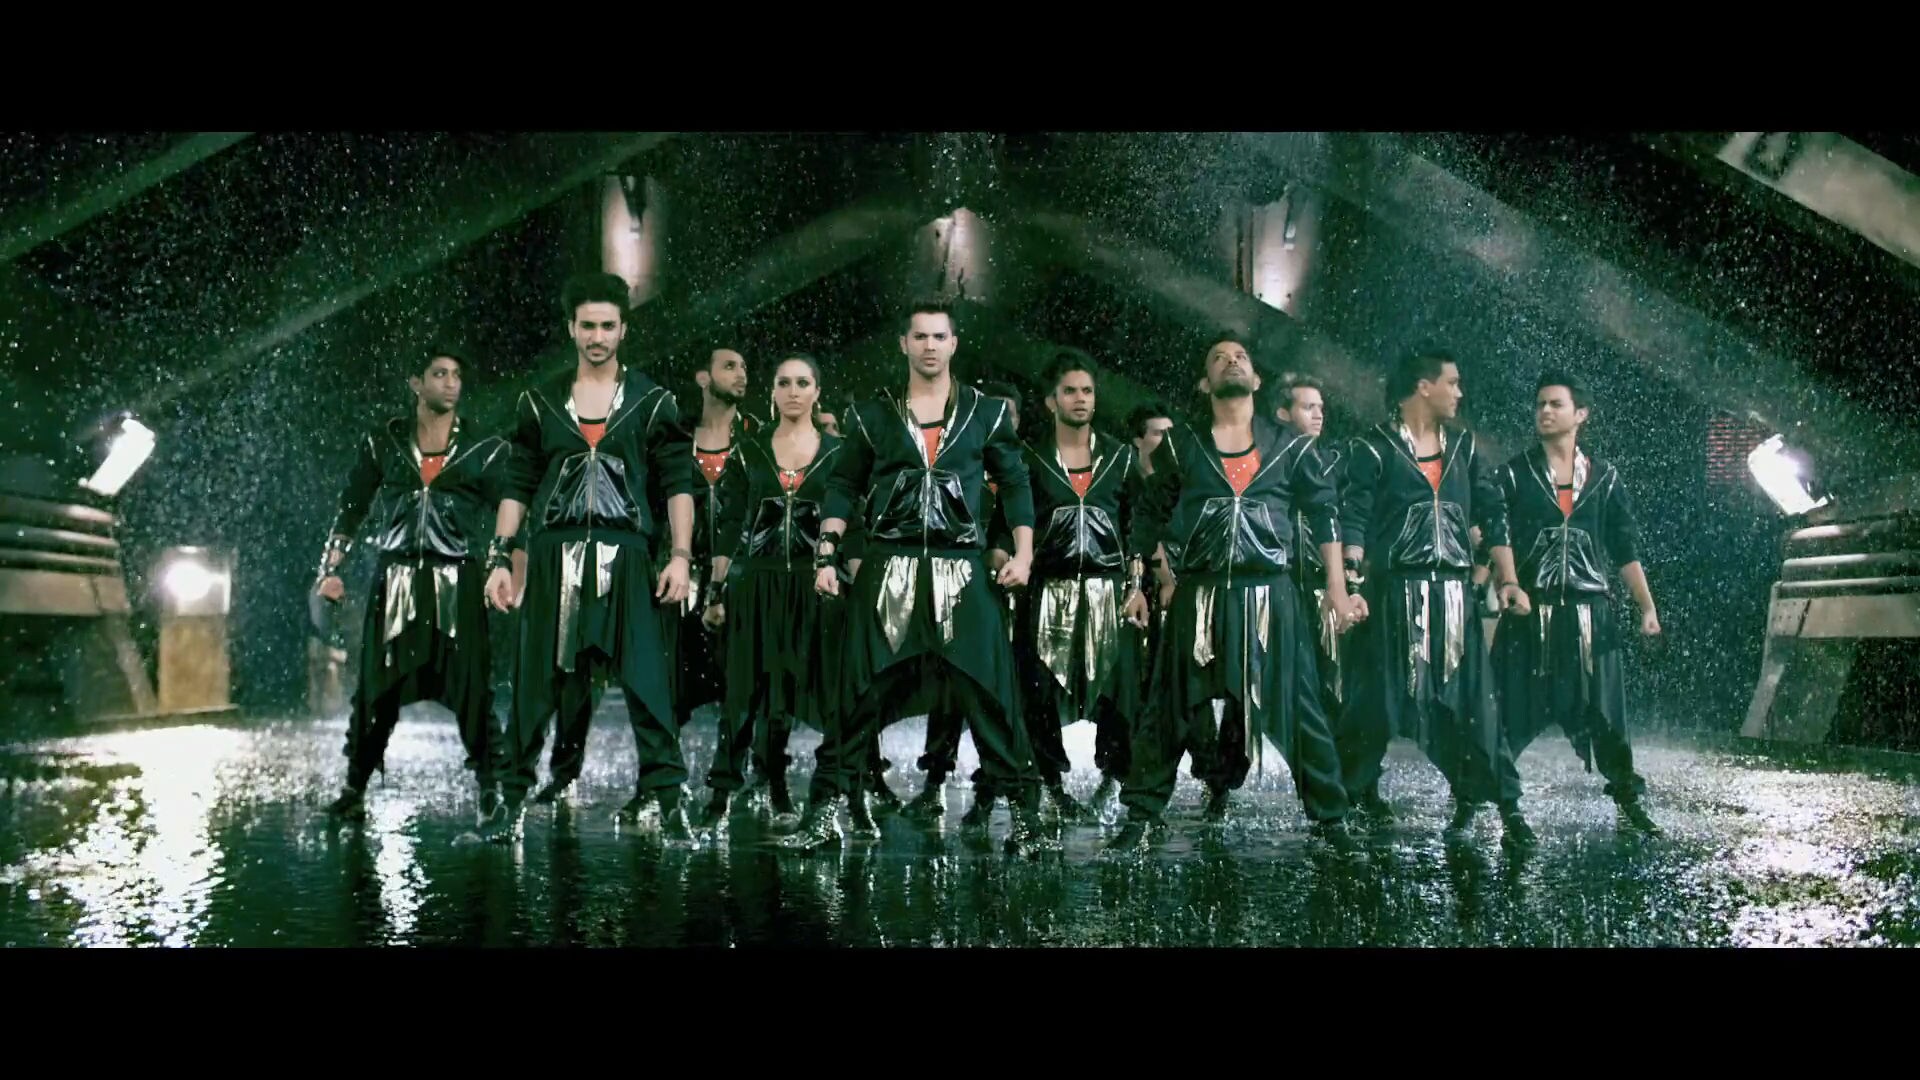 abcd 2 full movie watch online free hd